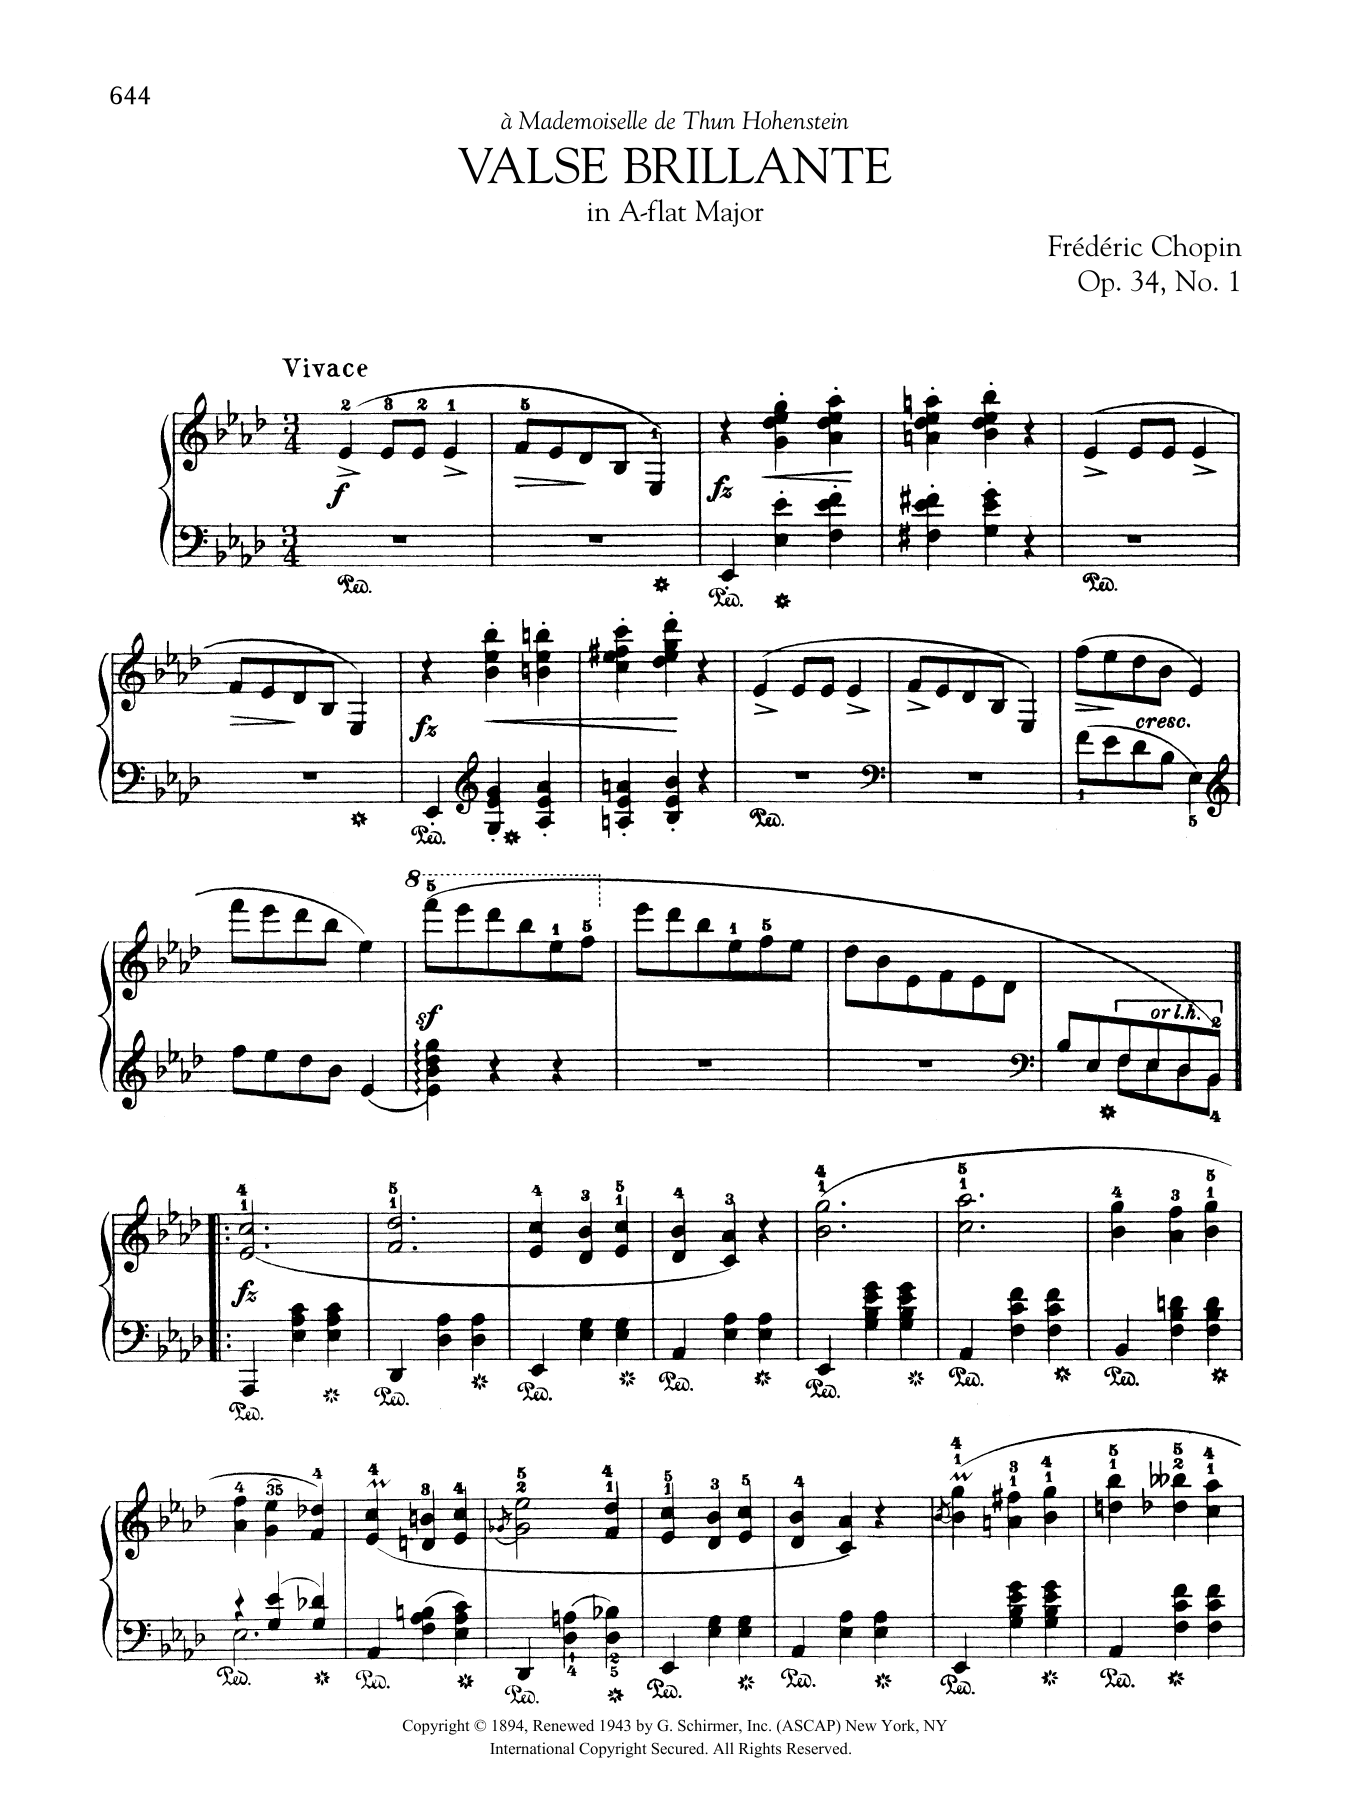 Download Frederic Chopin Valse brillante in A-flat Major, Op. 34 Sheet Music